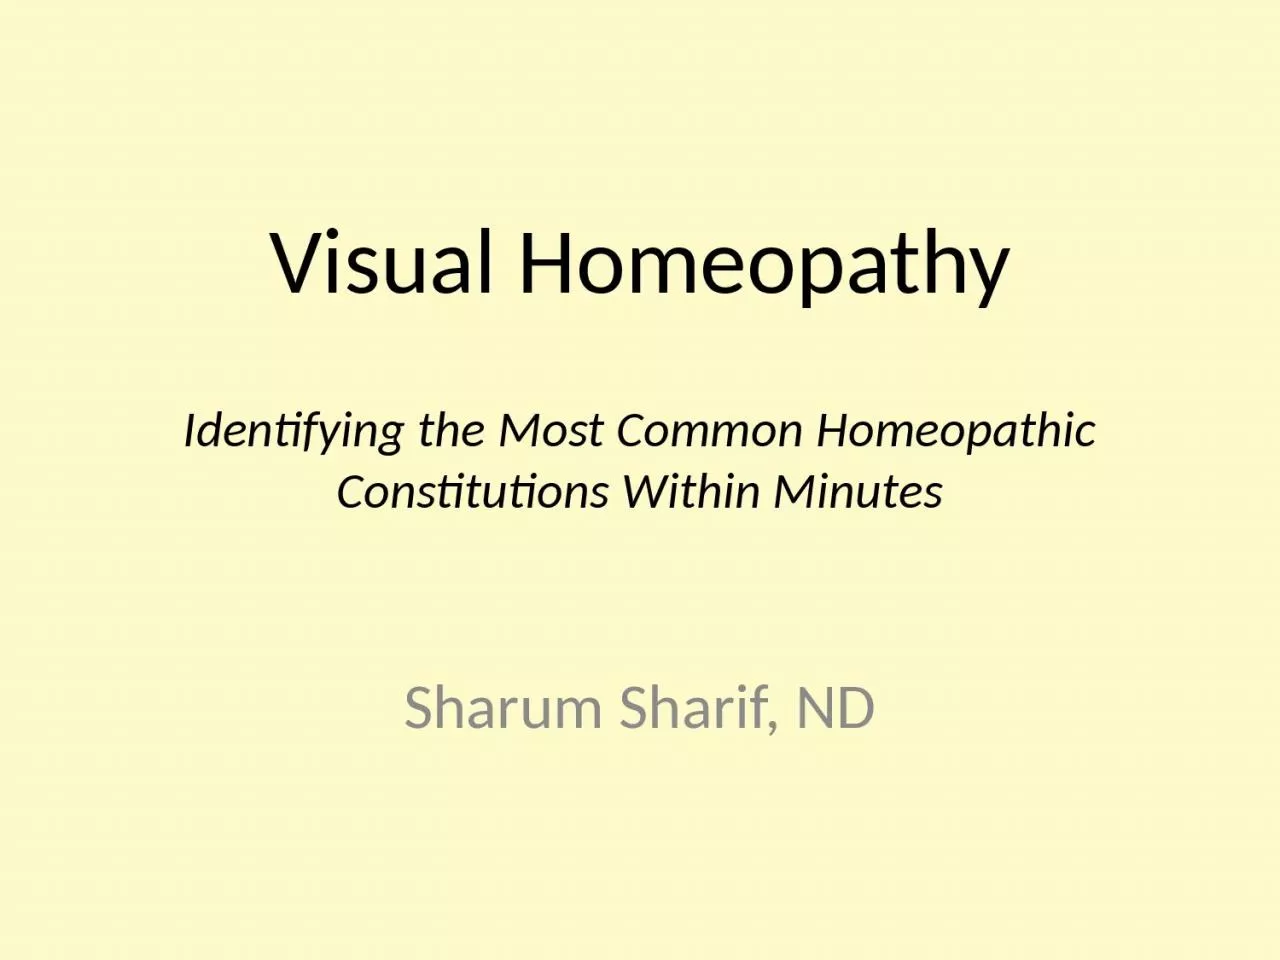 Visual Homeopathy Identifying the Most Common Homeopathic Constitutions Within Minutes